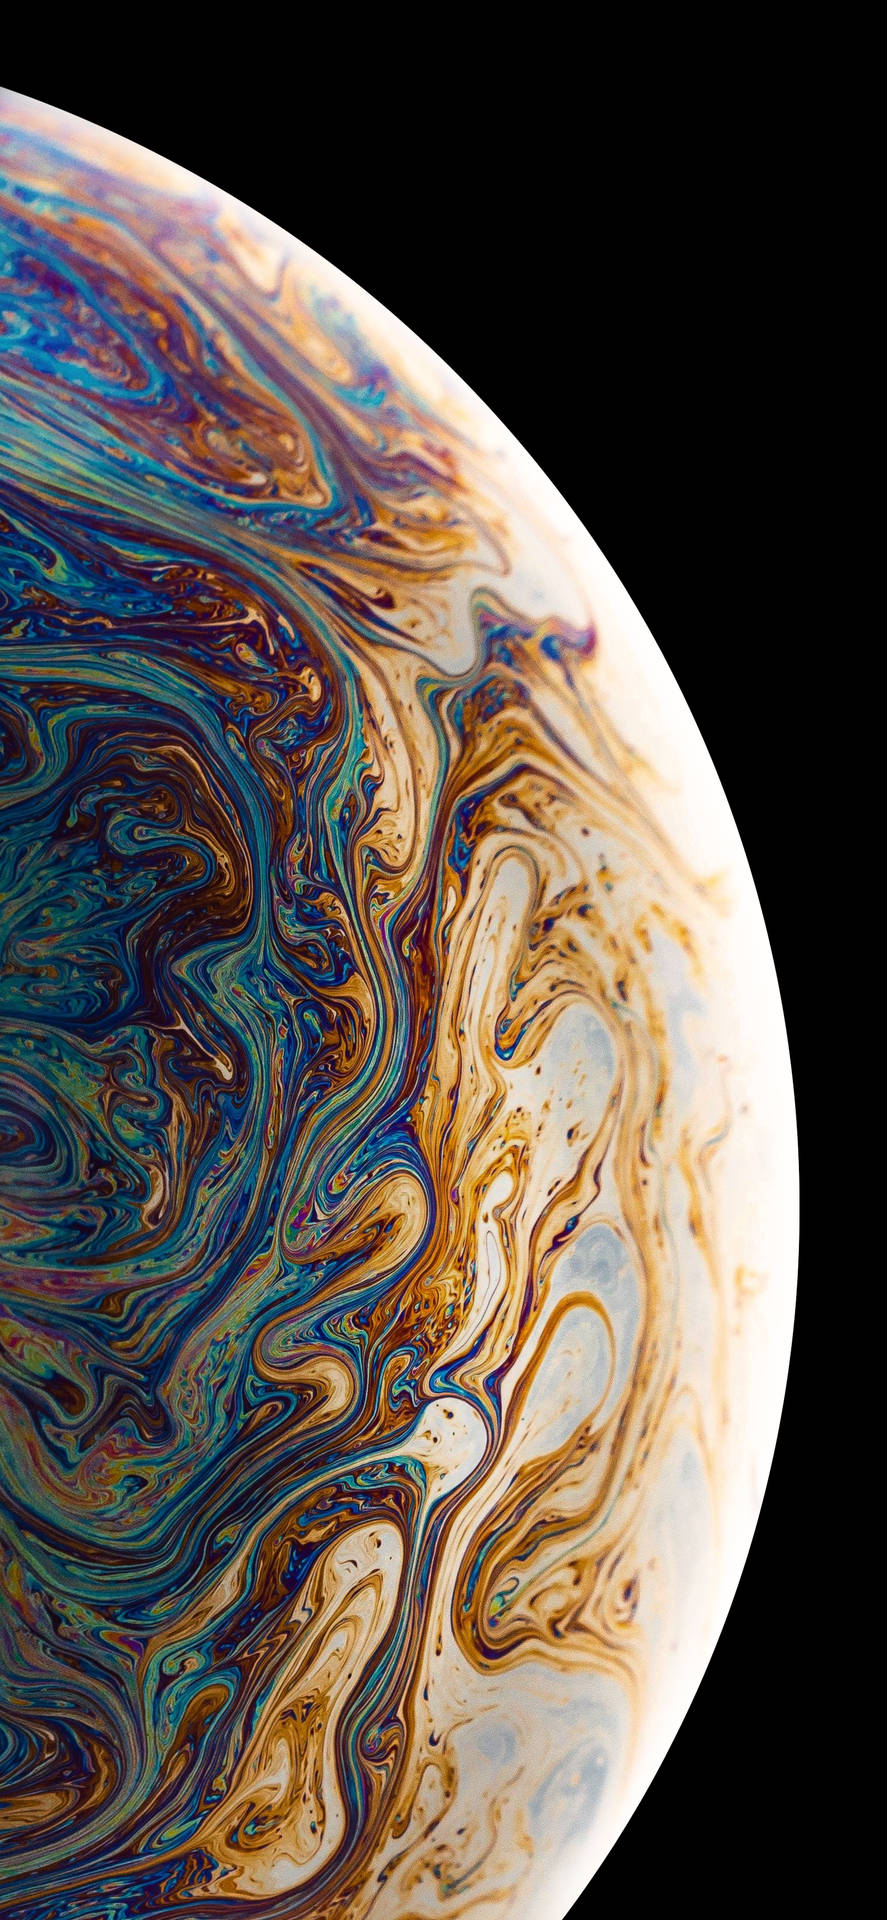 Showcase the beauty of Apple’s iPhone 11: a colorful universe of possibilities. Wallpaper